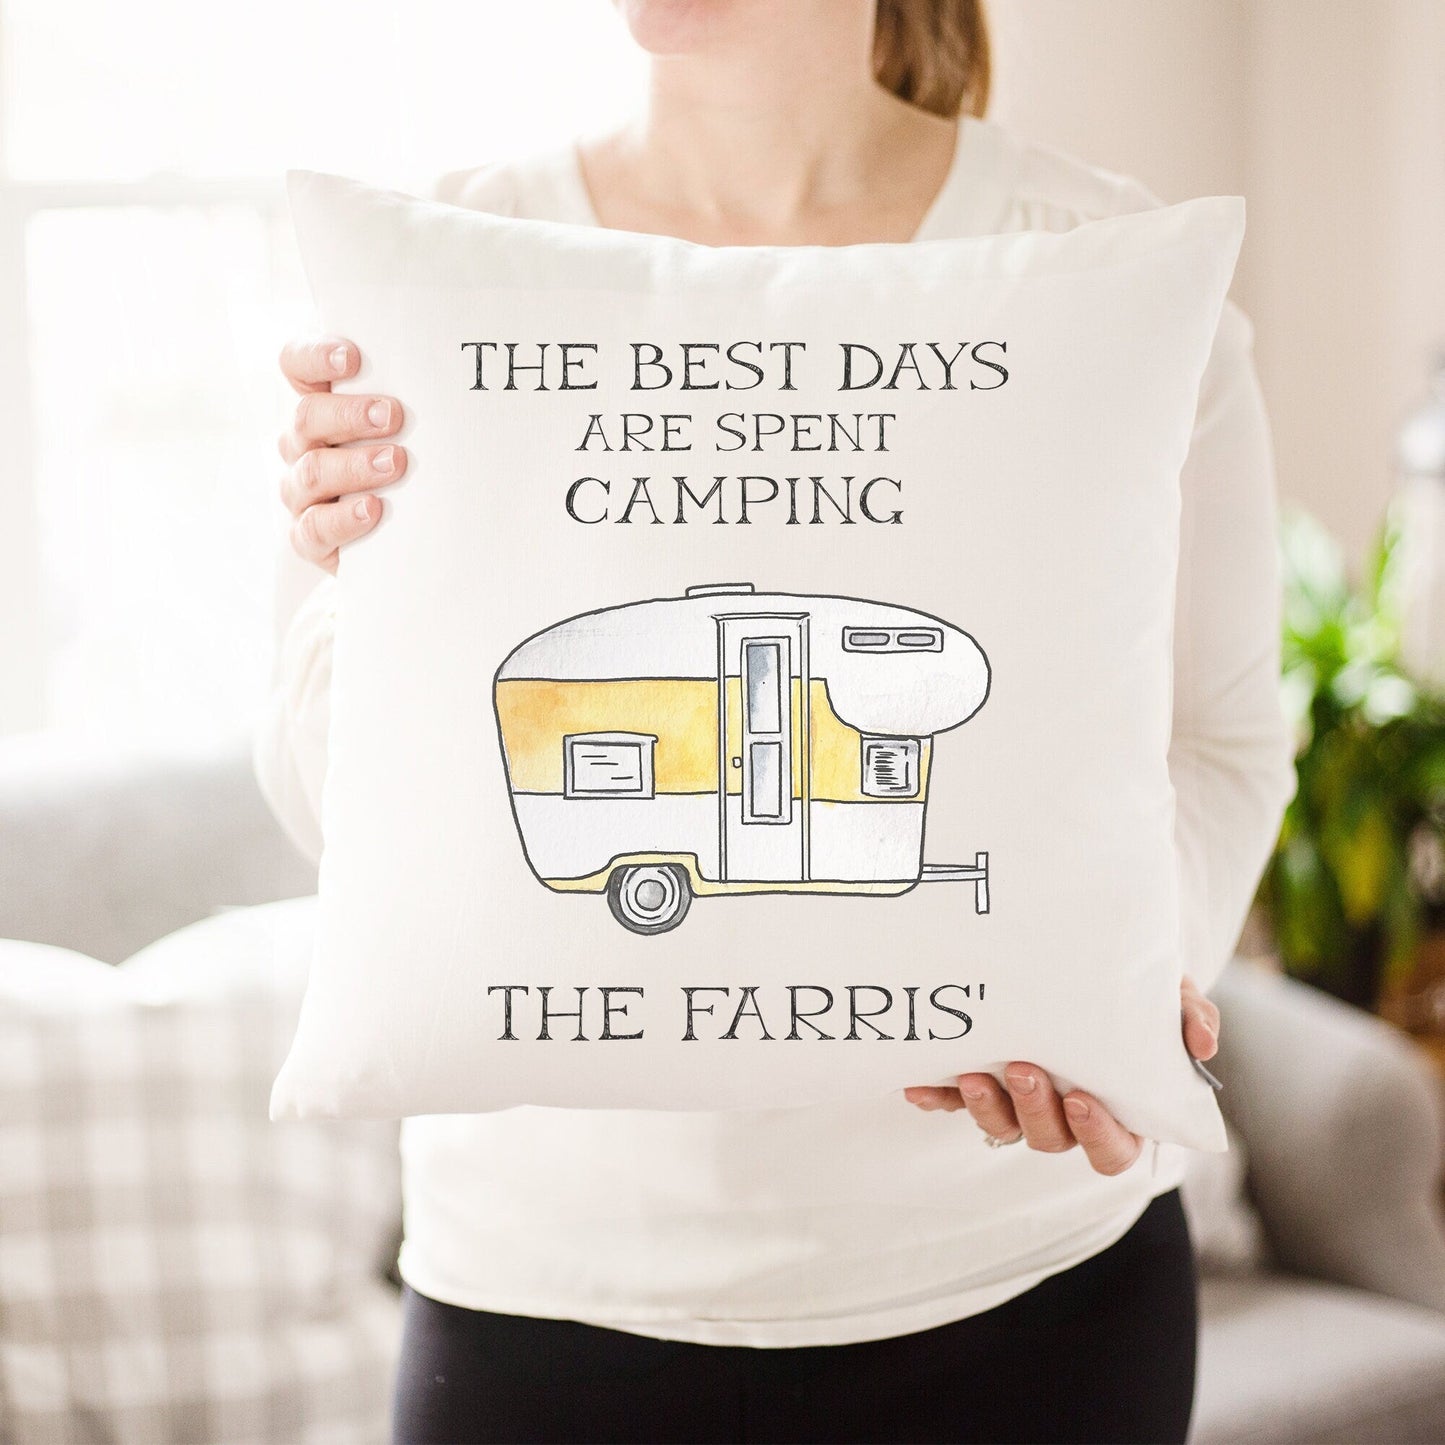 Load image into Gallery viewer, RV Decor Ideas | The Best Days are Spent Camping Pillow | Customizable Camper Gift Idea | Camper Van Trailer Decor Pillow | Campsite Decor
